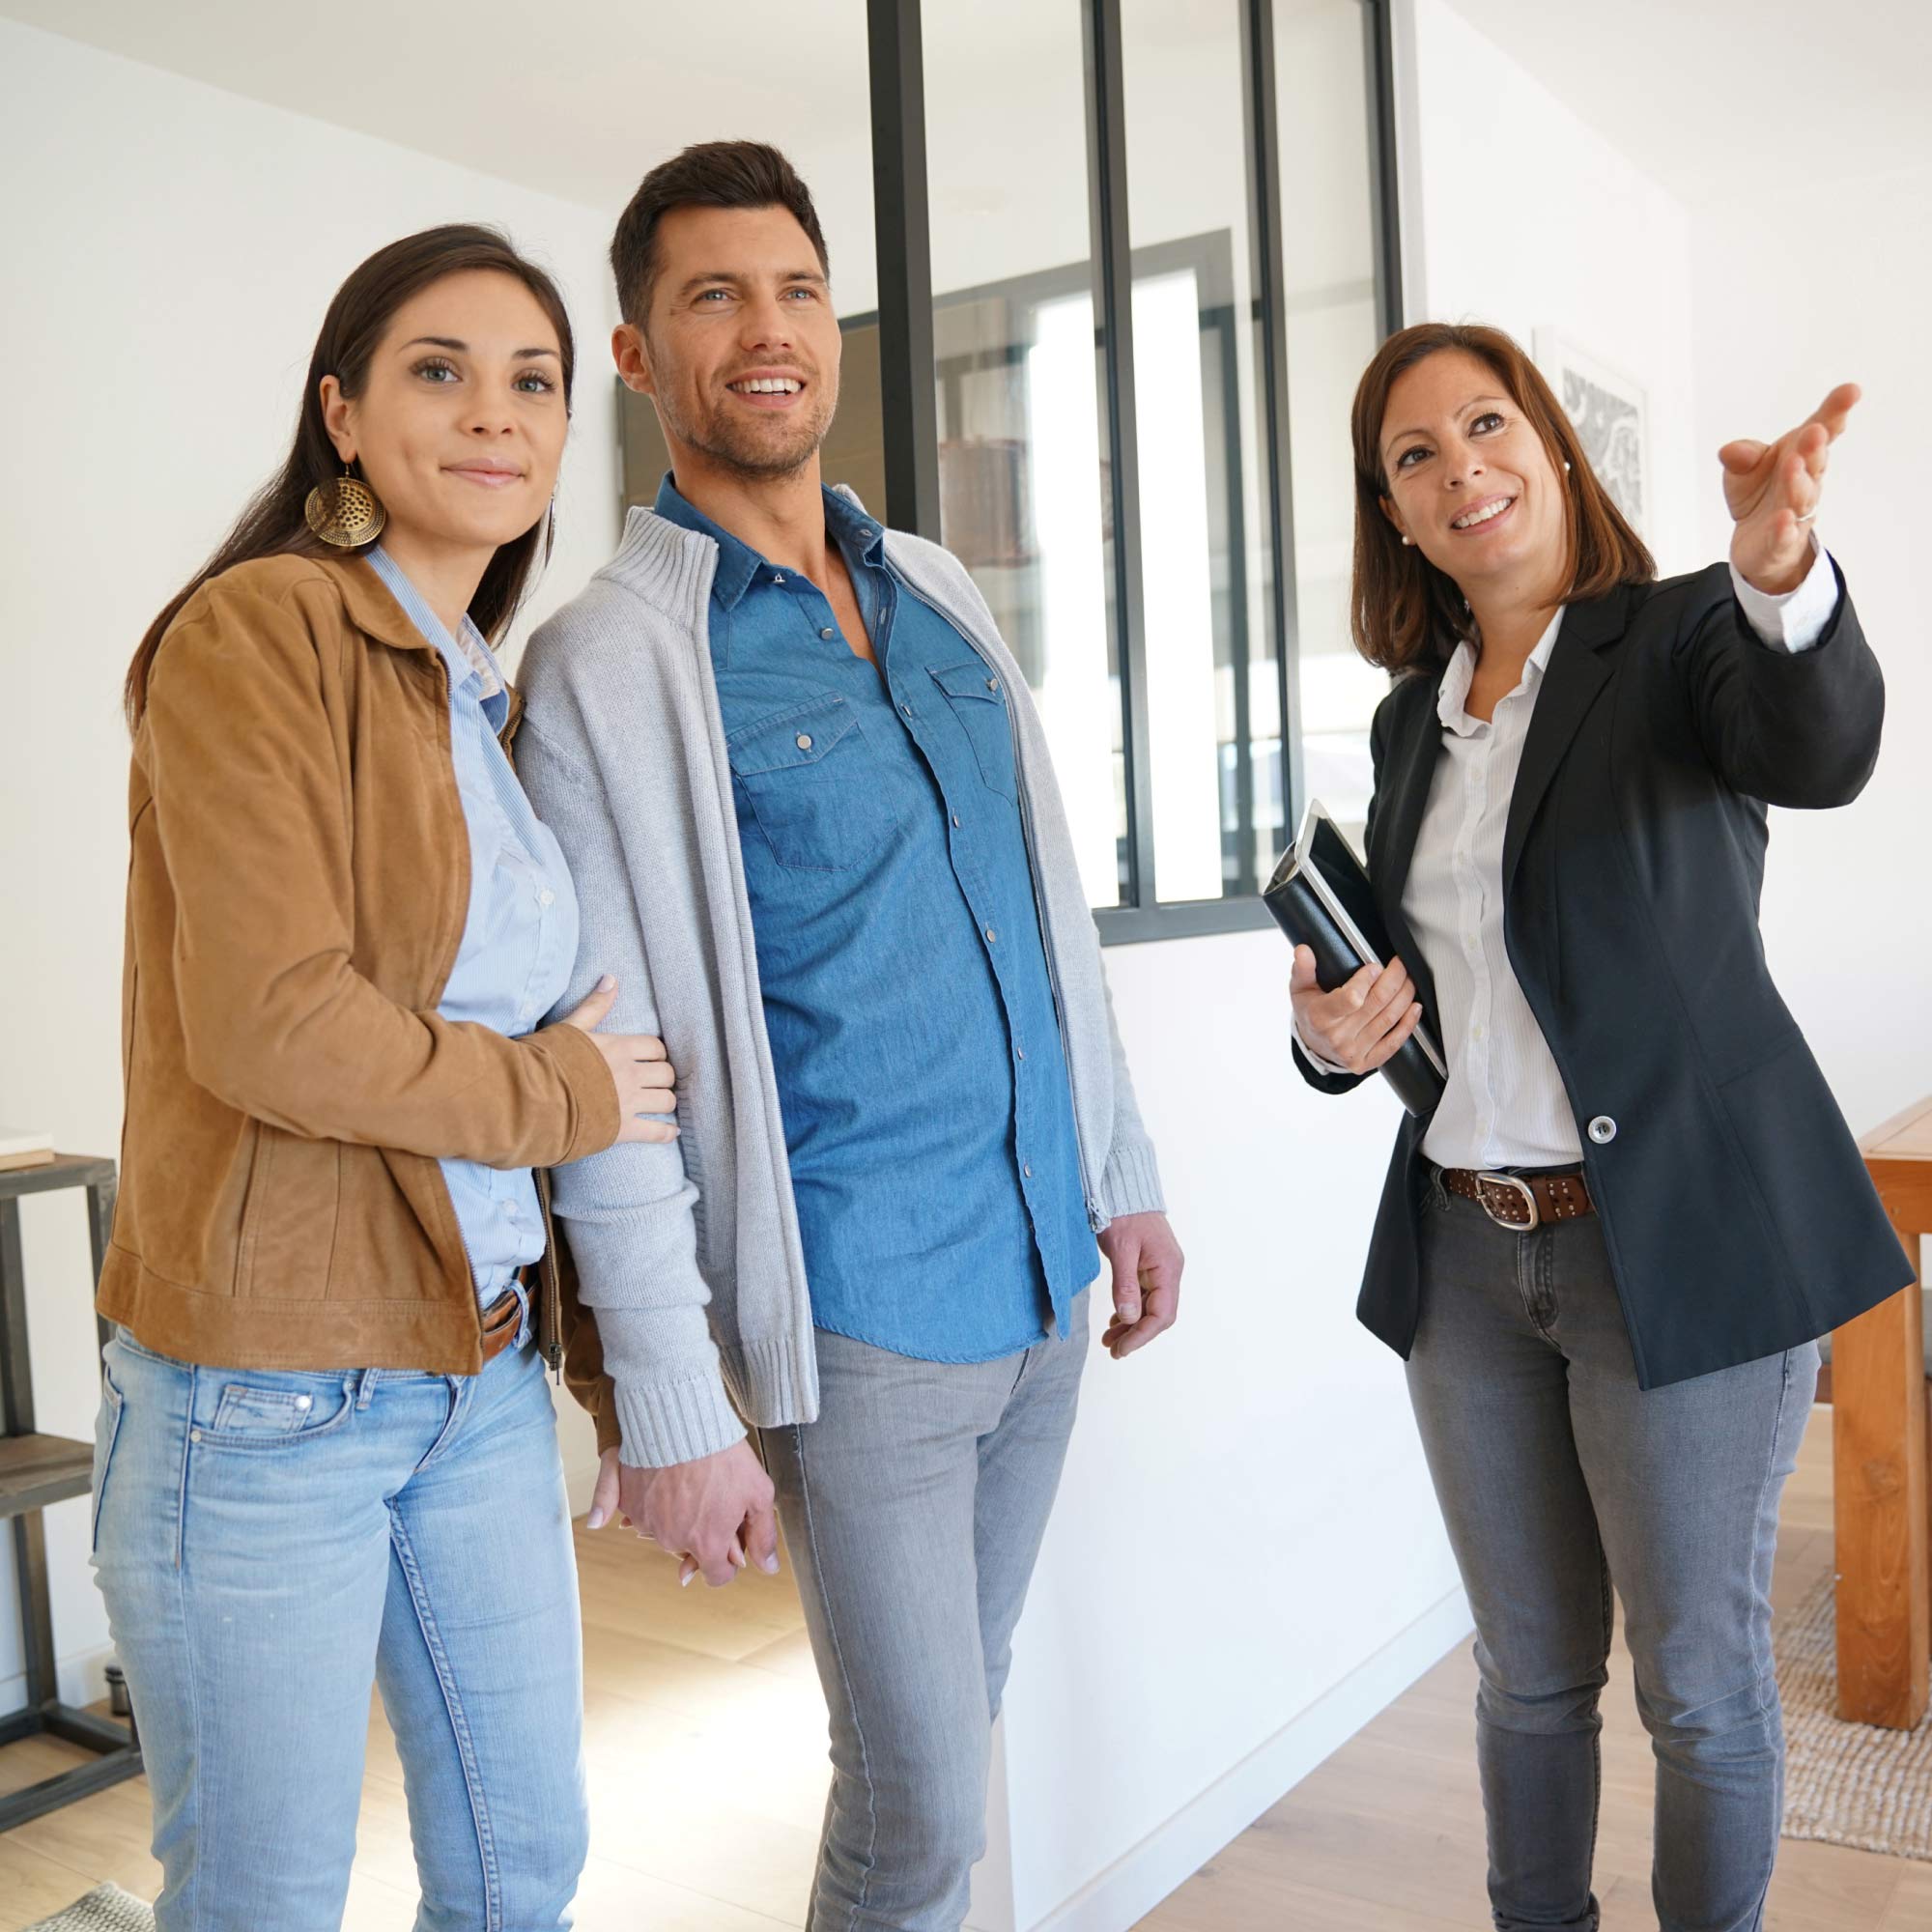 A real estate agent shows a couple a house.